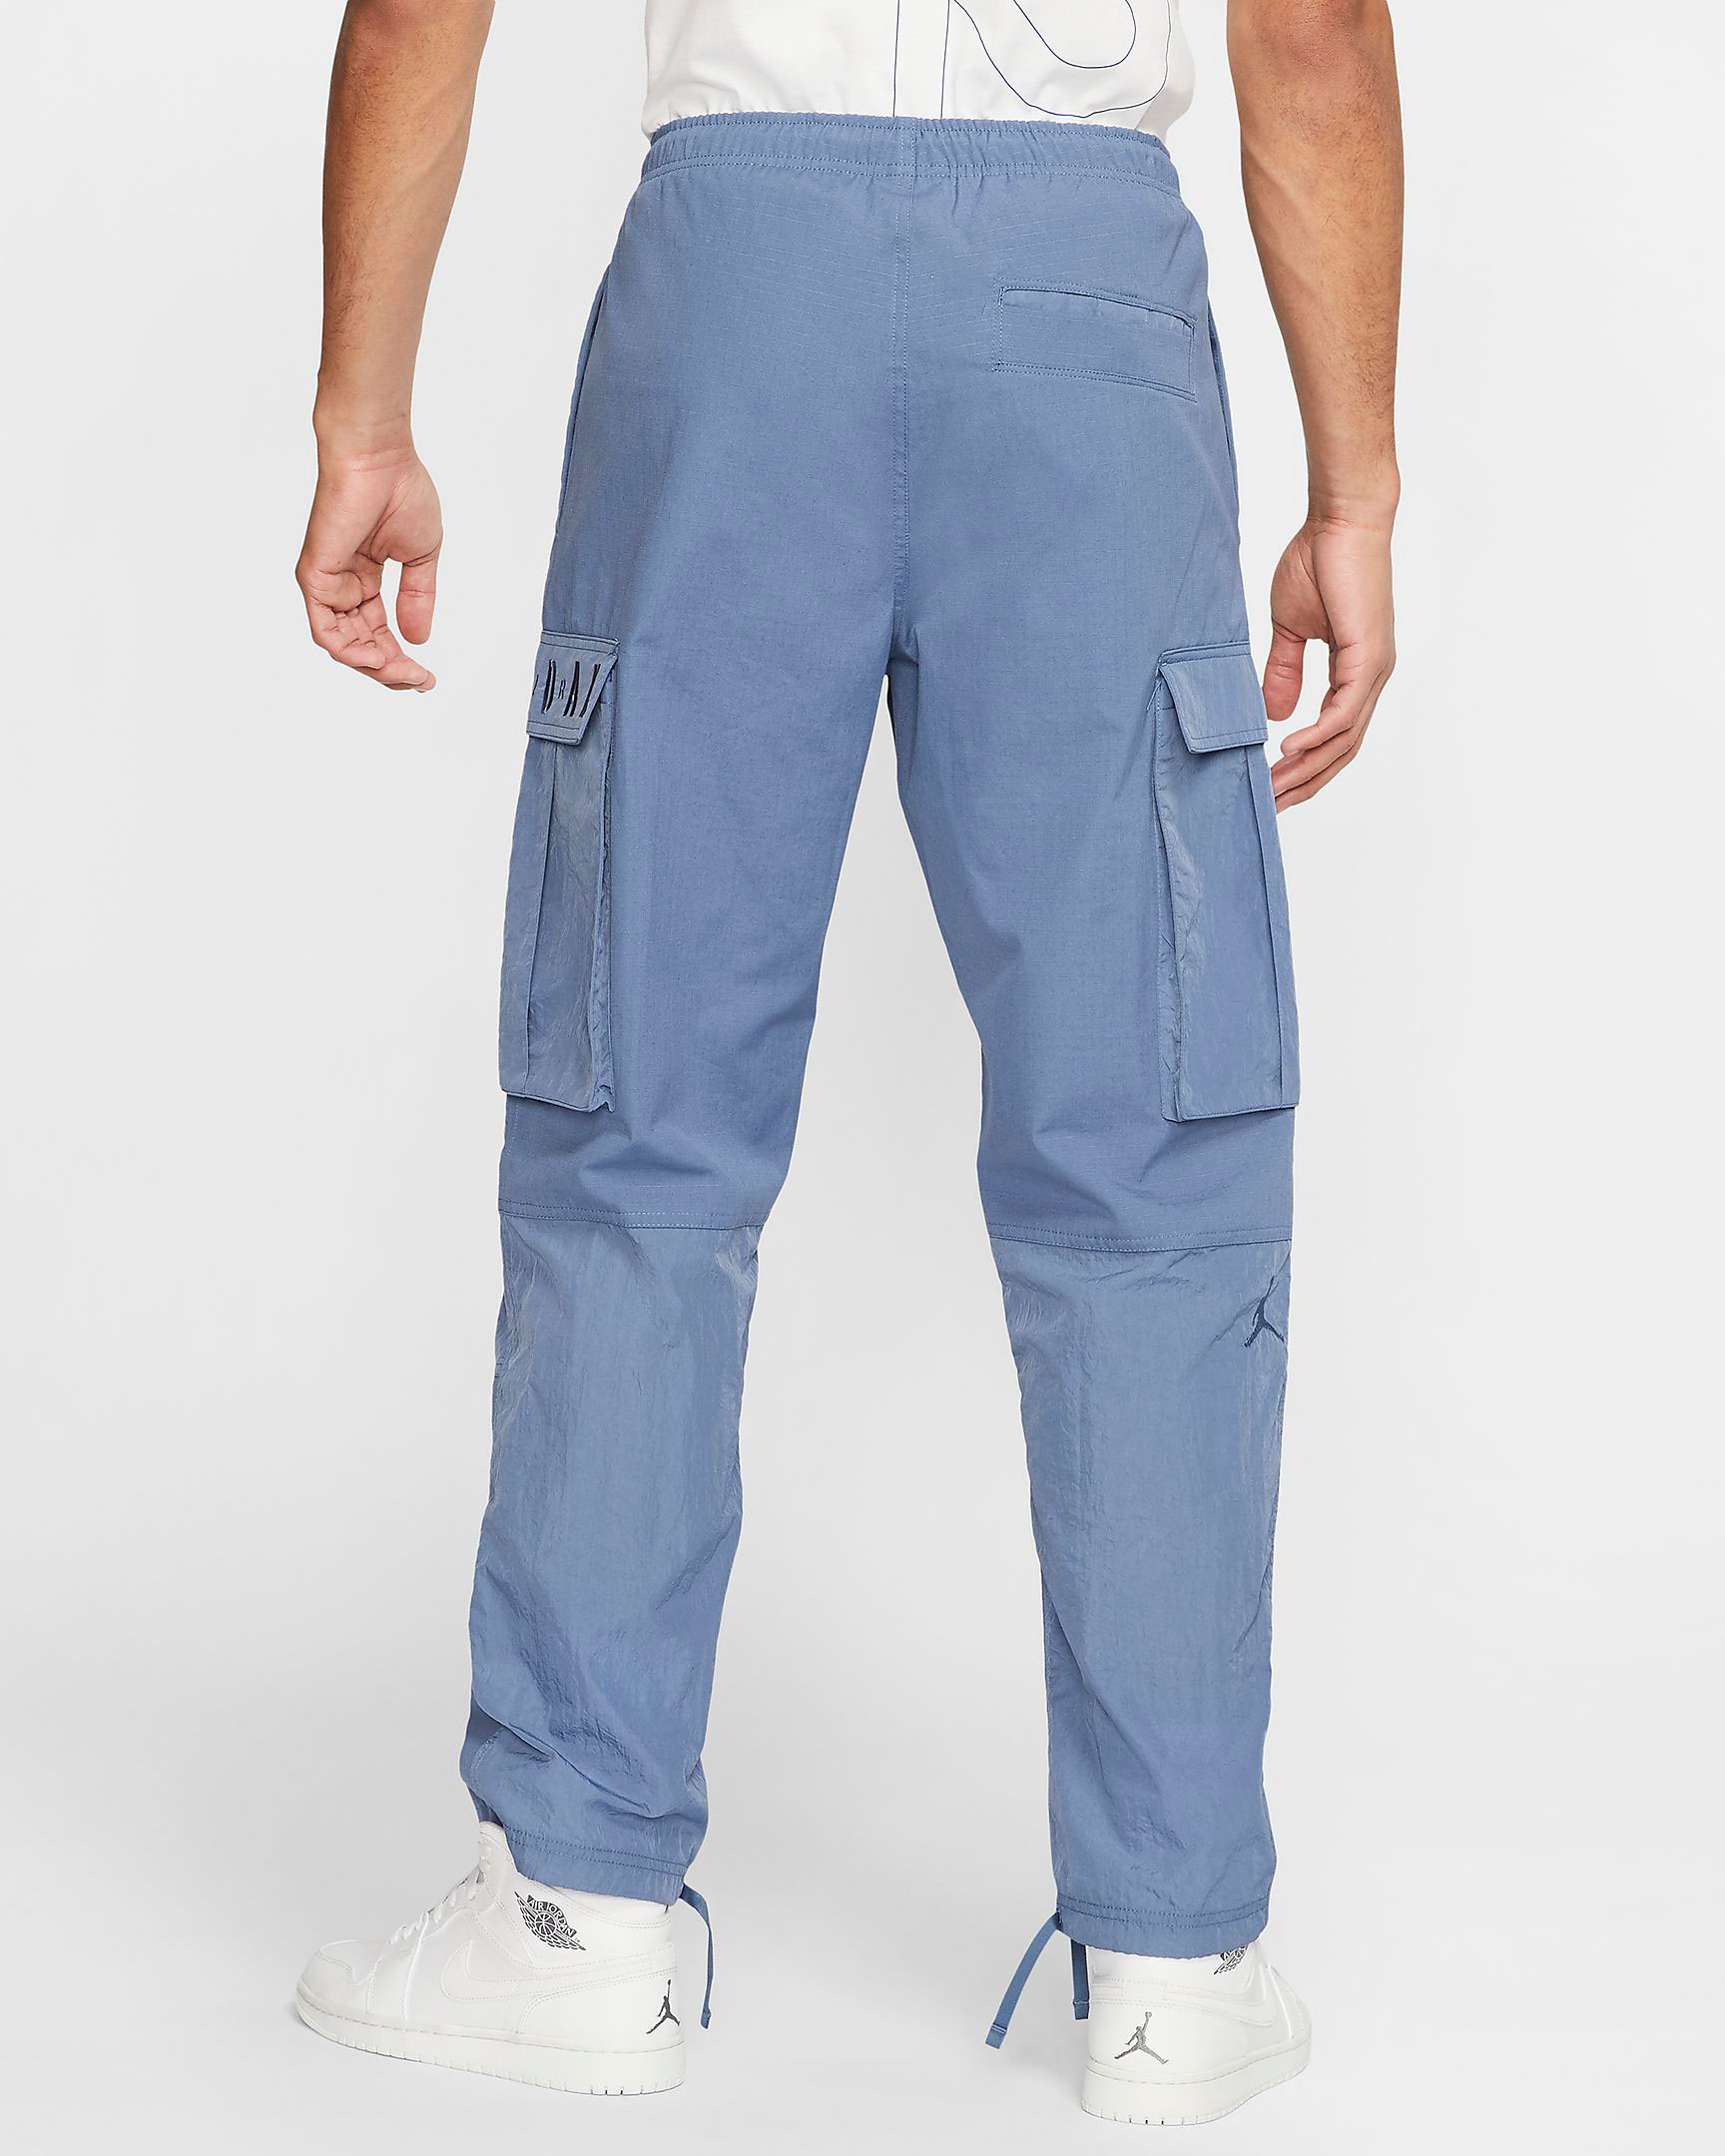 Jordan Cargo Pants Now Available in 